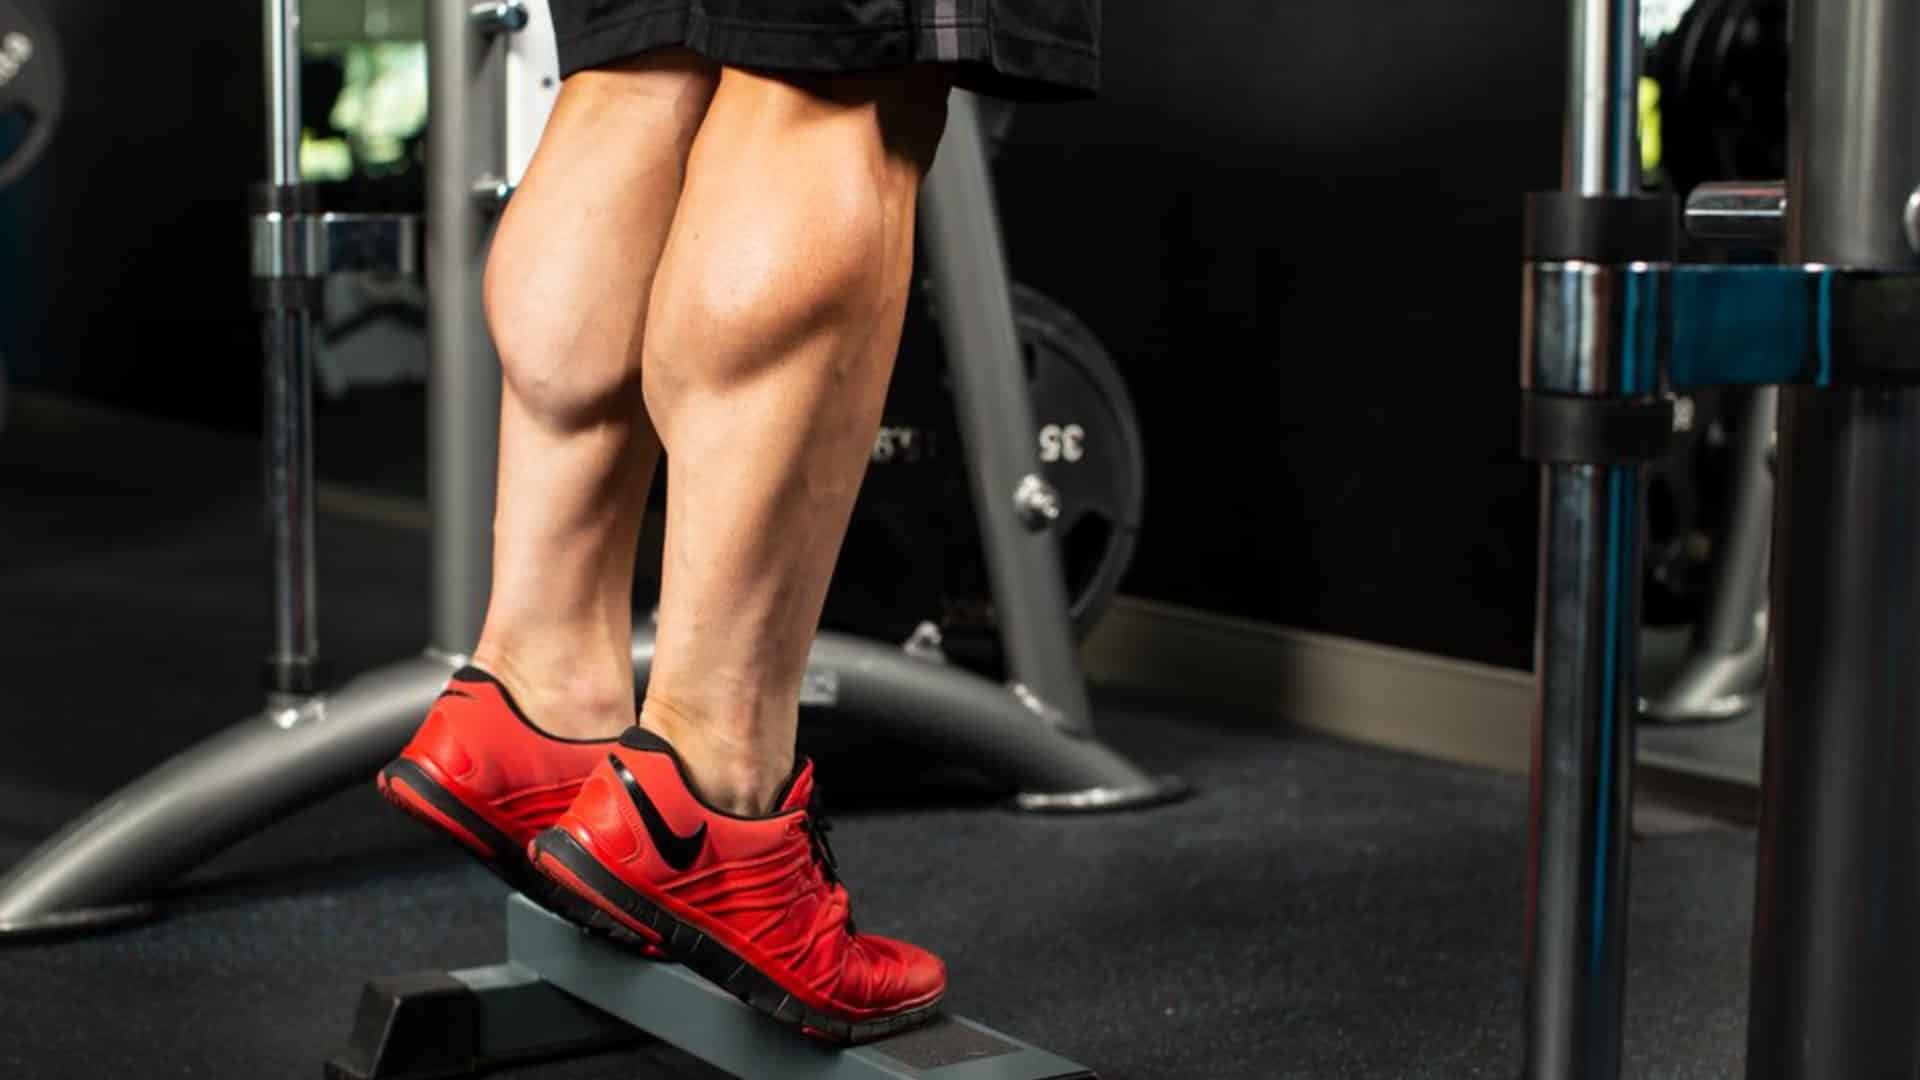 Barbell Leg Workout For Mass and Strength